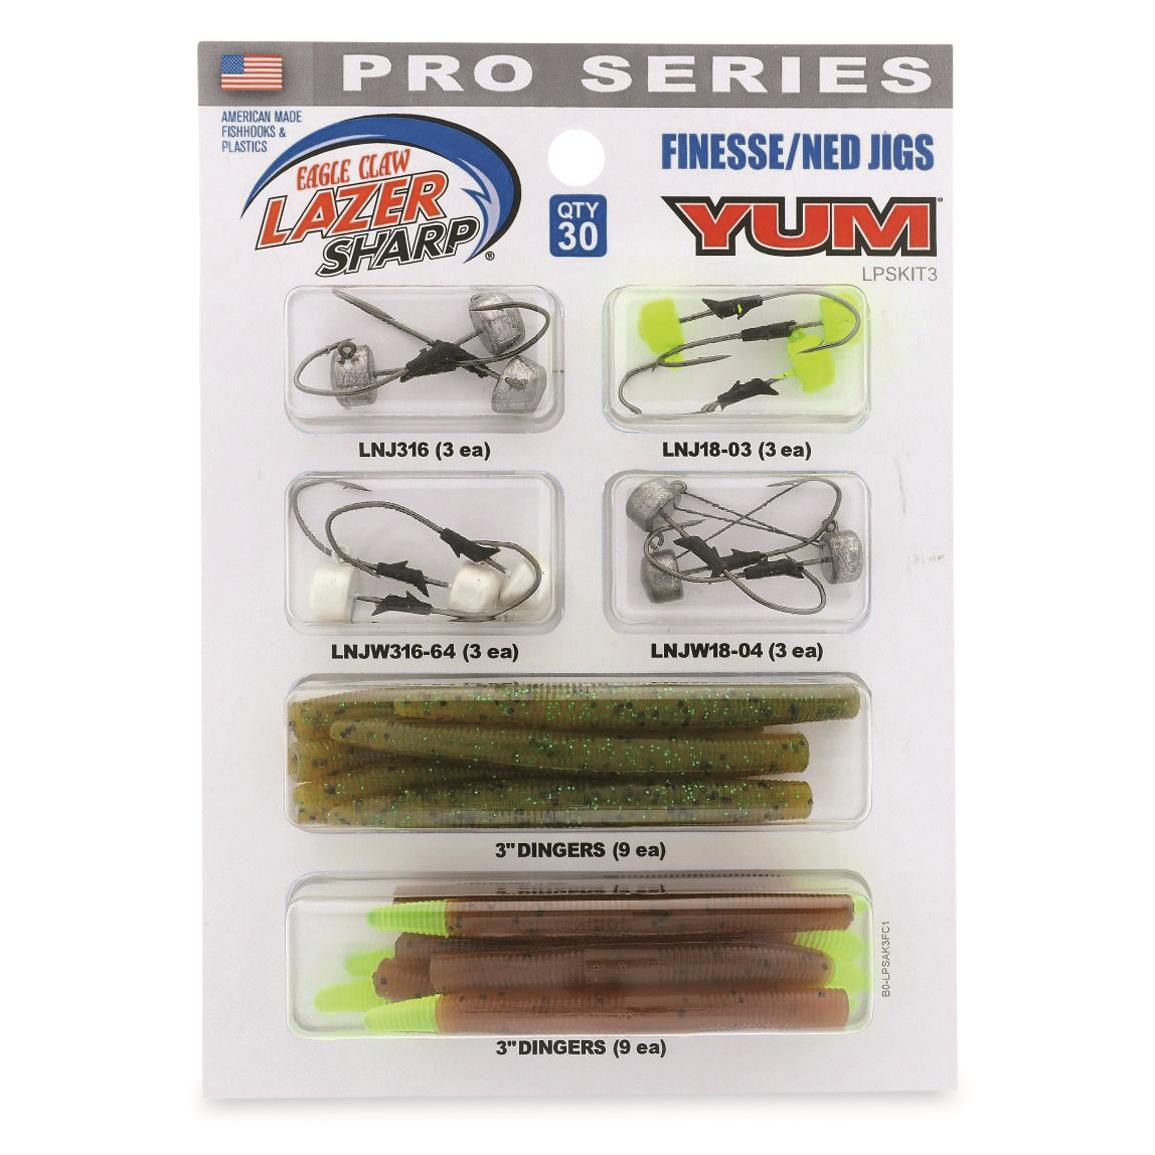 Eagle Claw Lazer Sharp Pro Series Avid Finesse/Ned Jig Kit, 30 Pieces